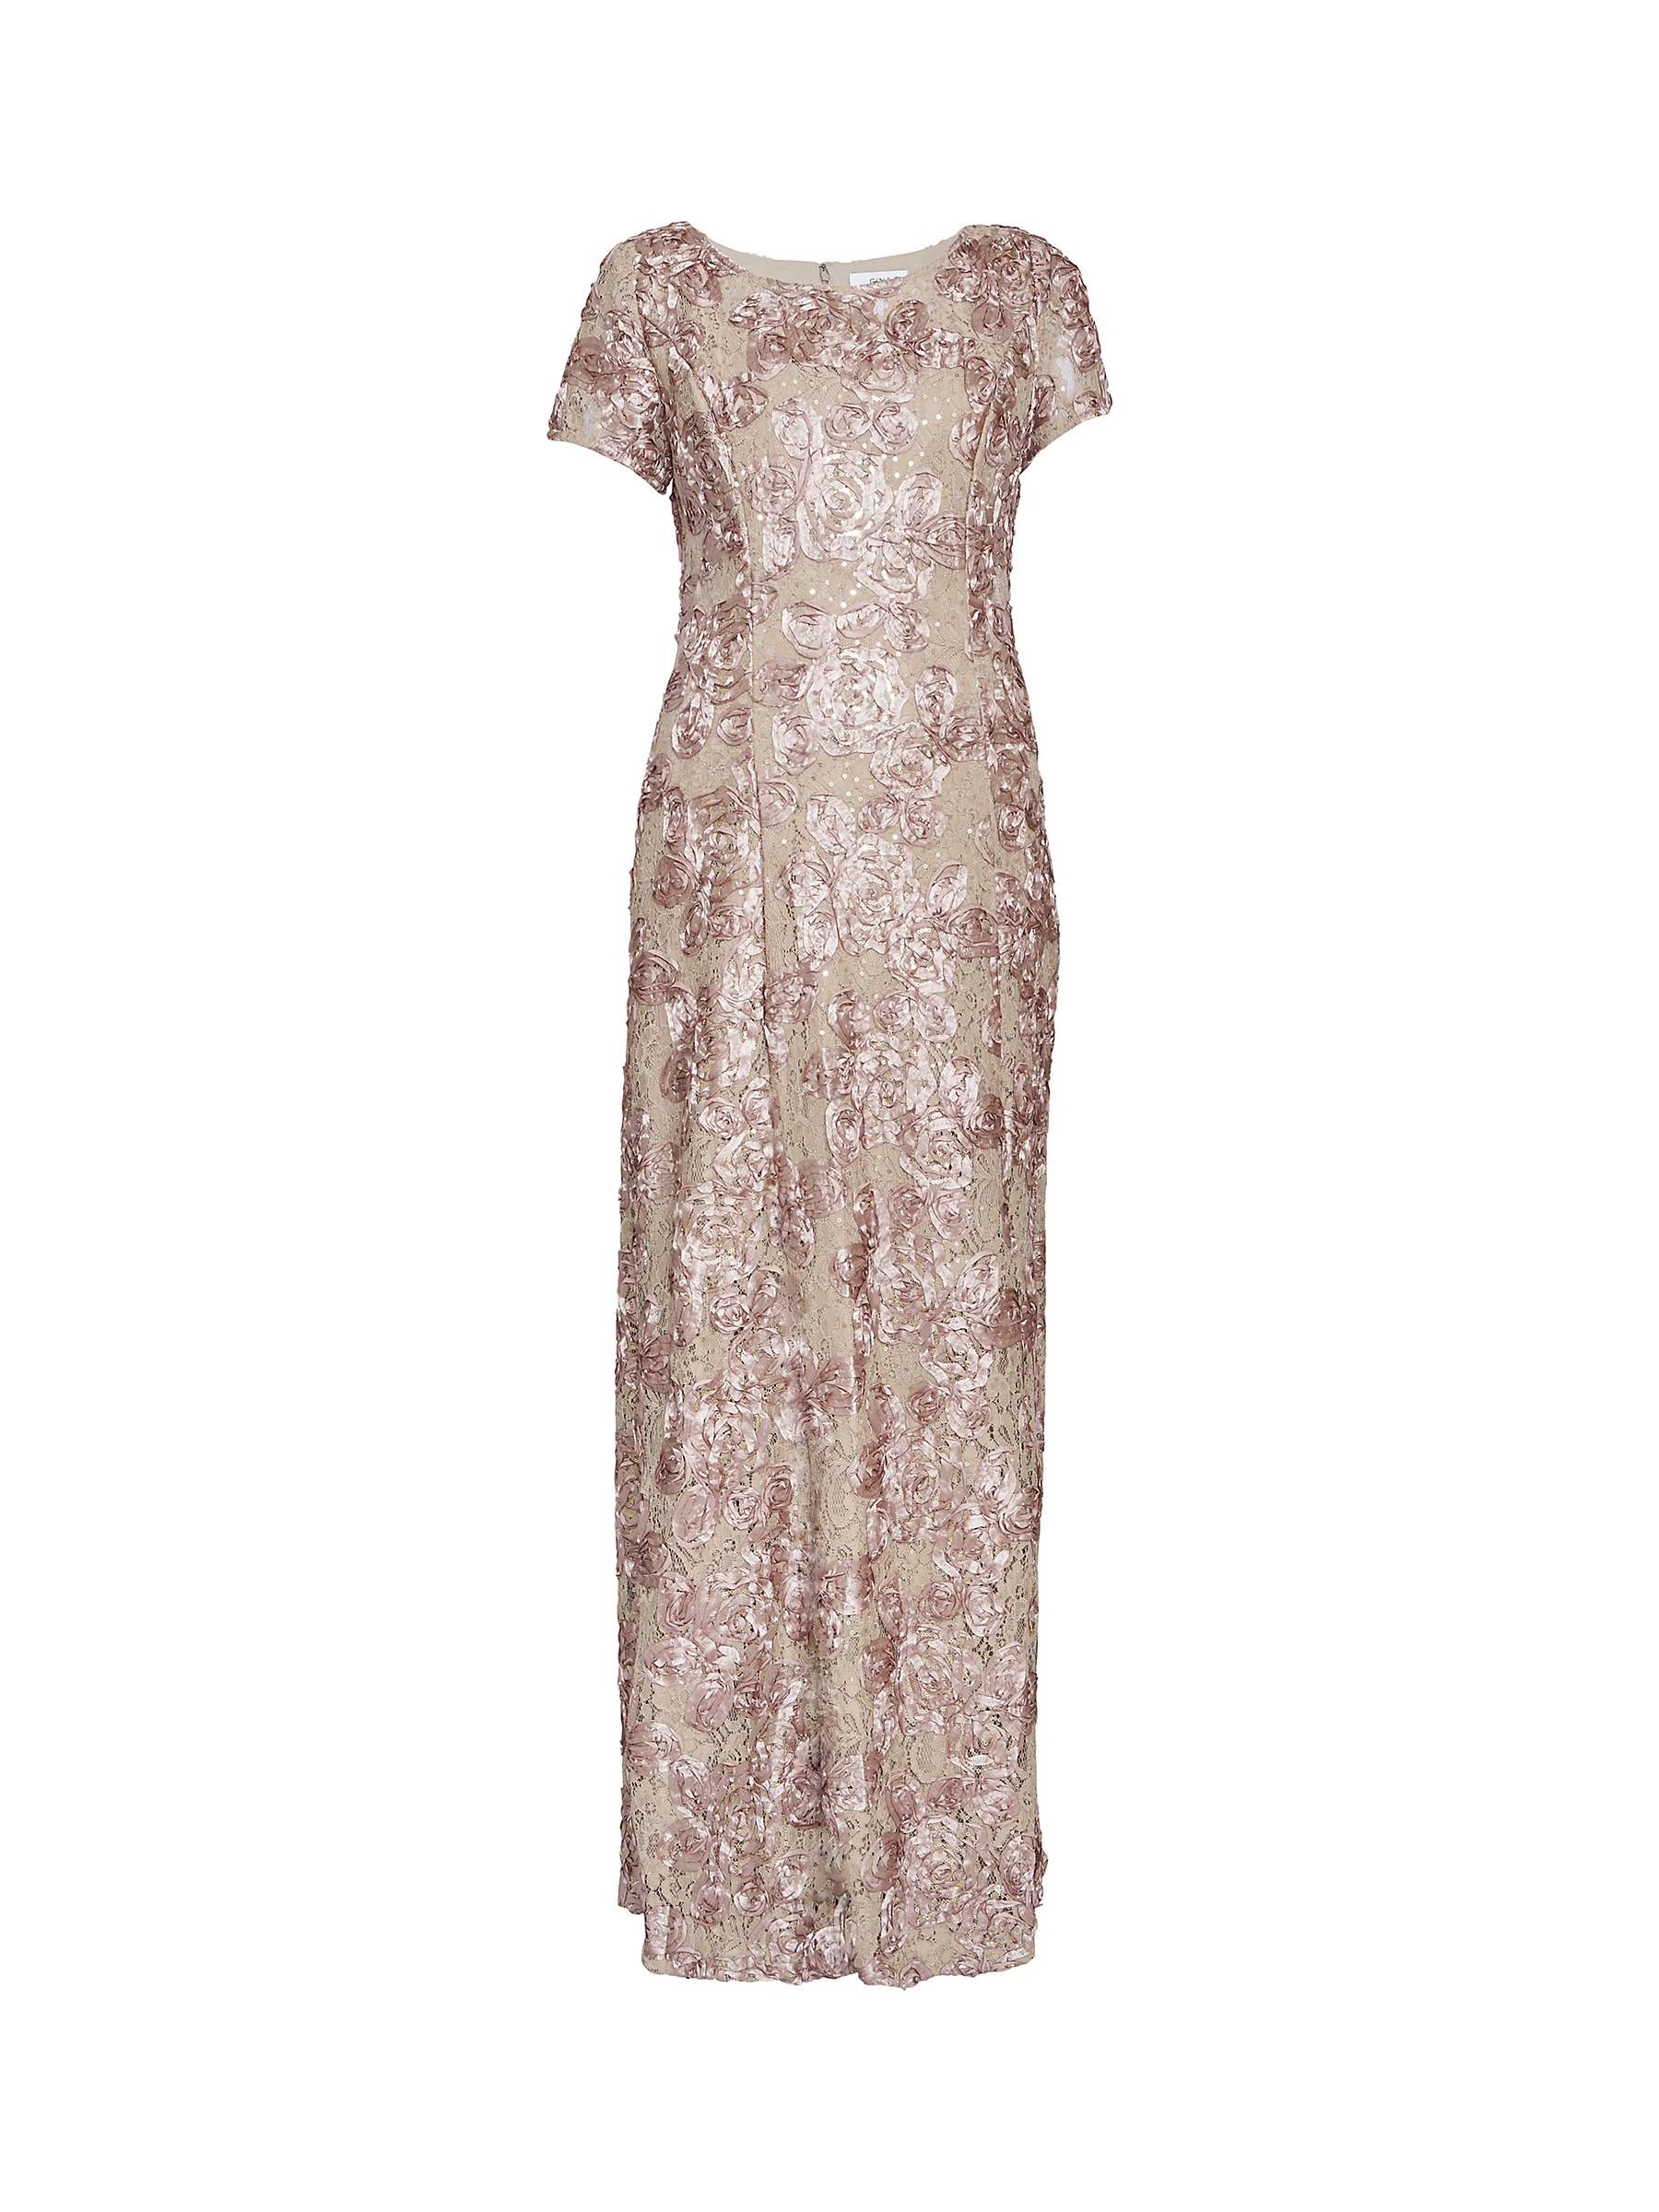 Buy Gina Bacconi Nancy Gown, Champagne Online at johnlewis.com